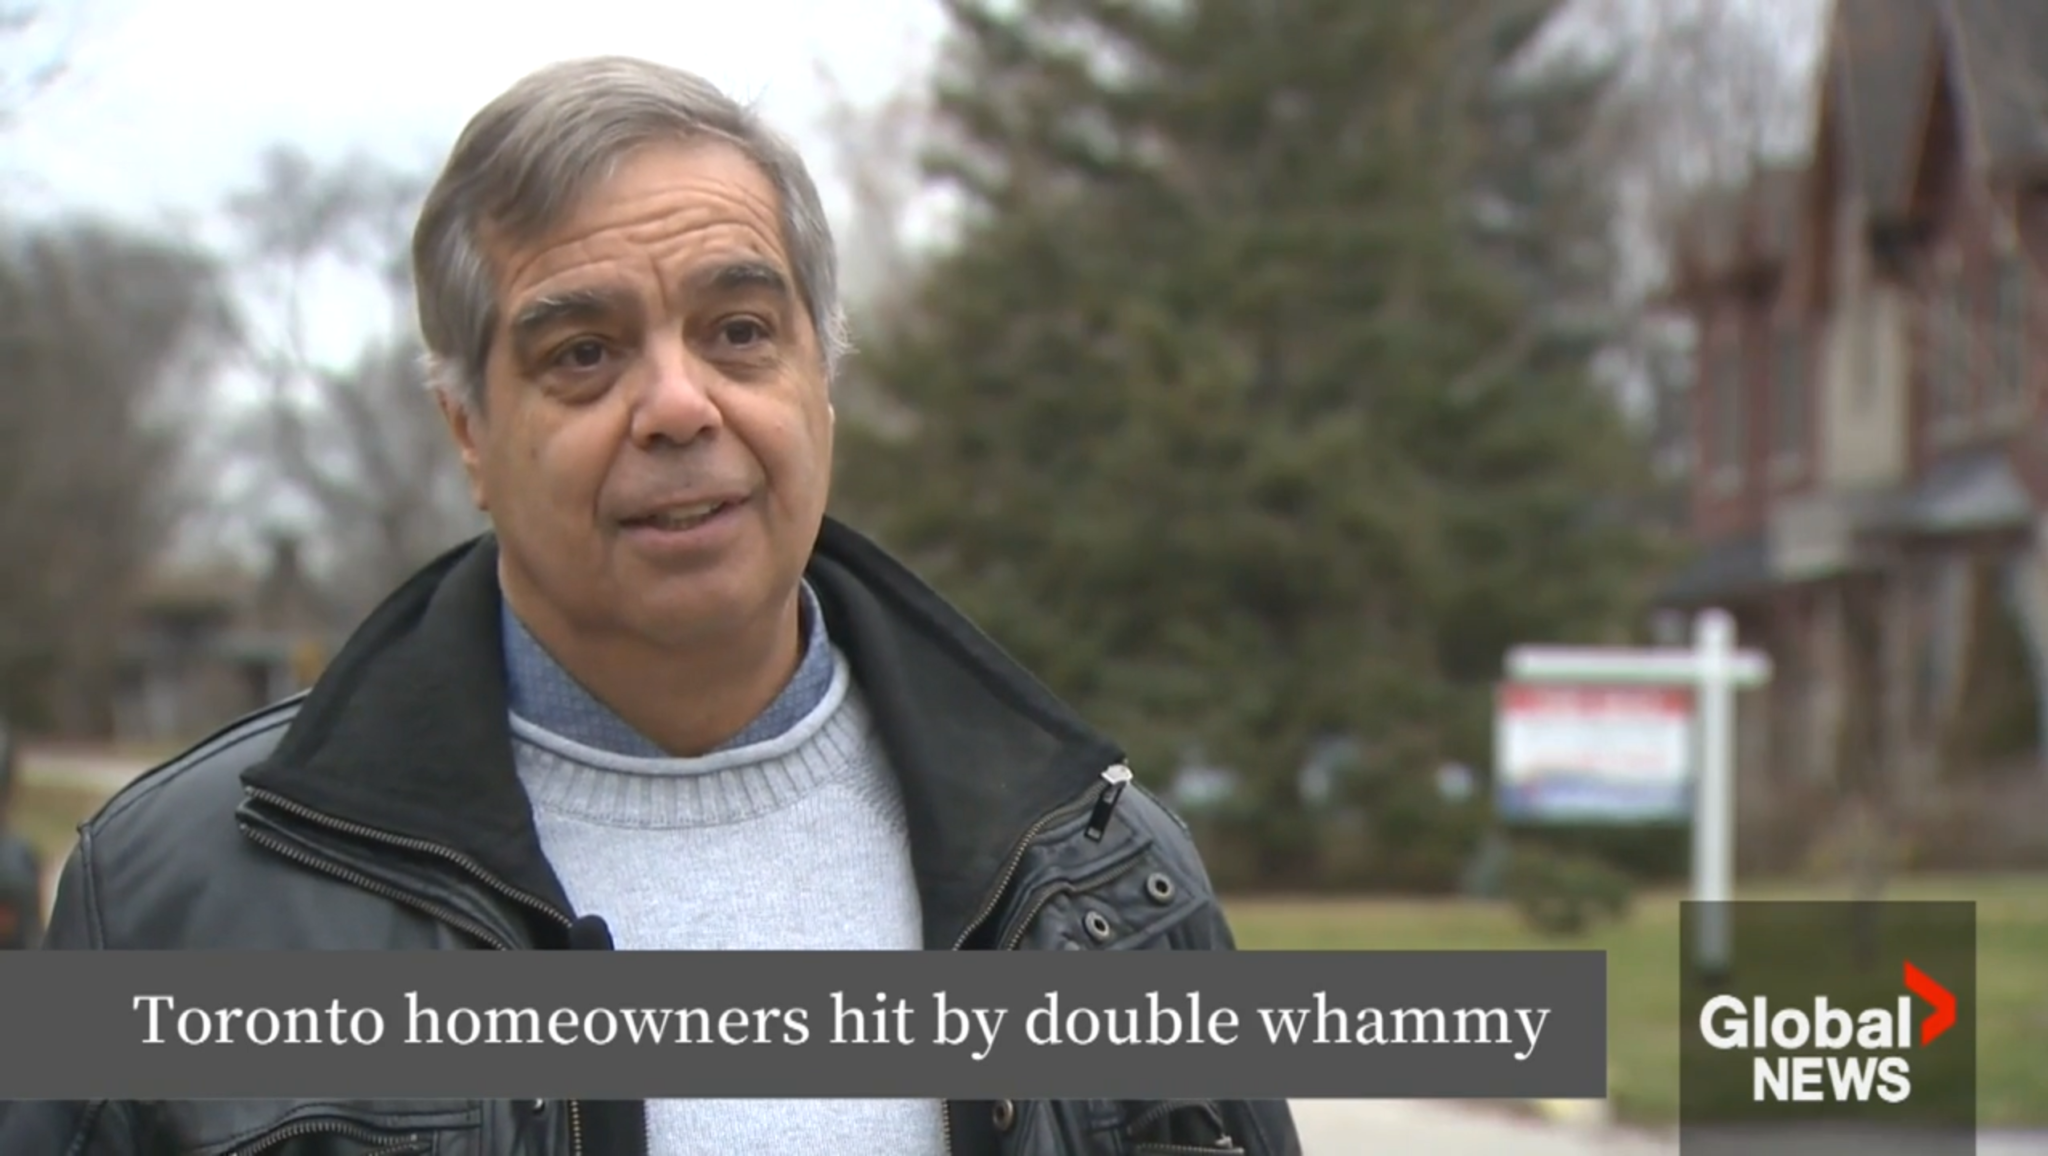 Toronto homeowners face higher interest rates, property tax increase